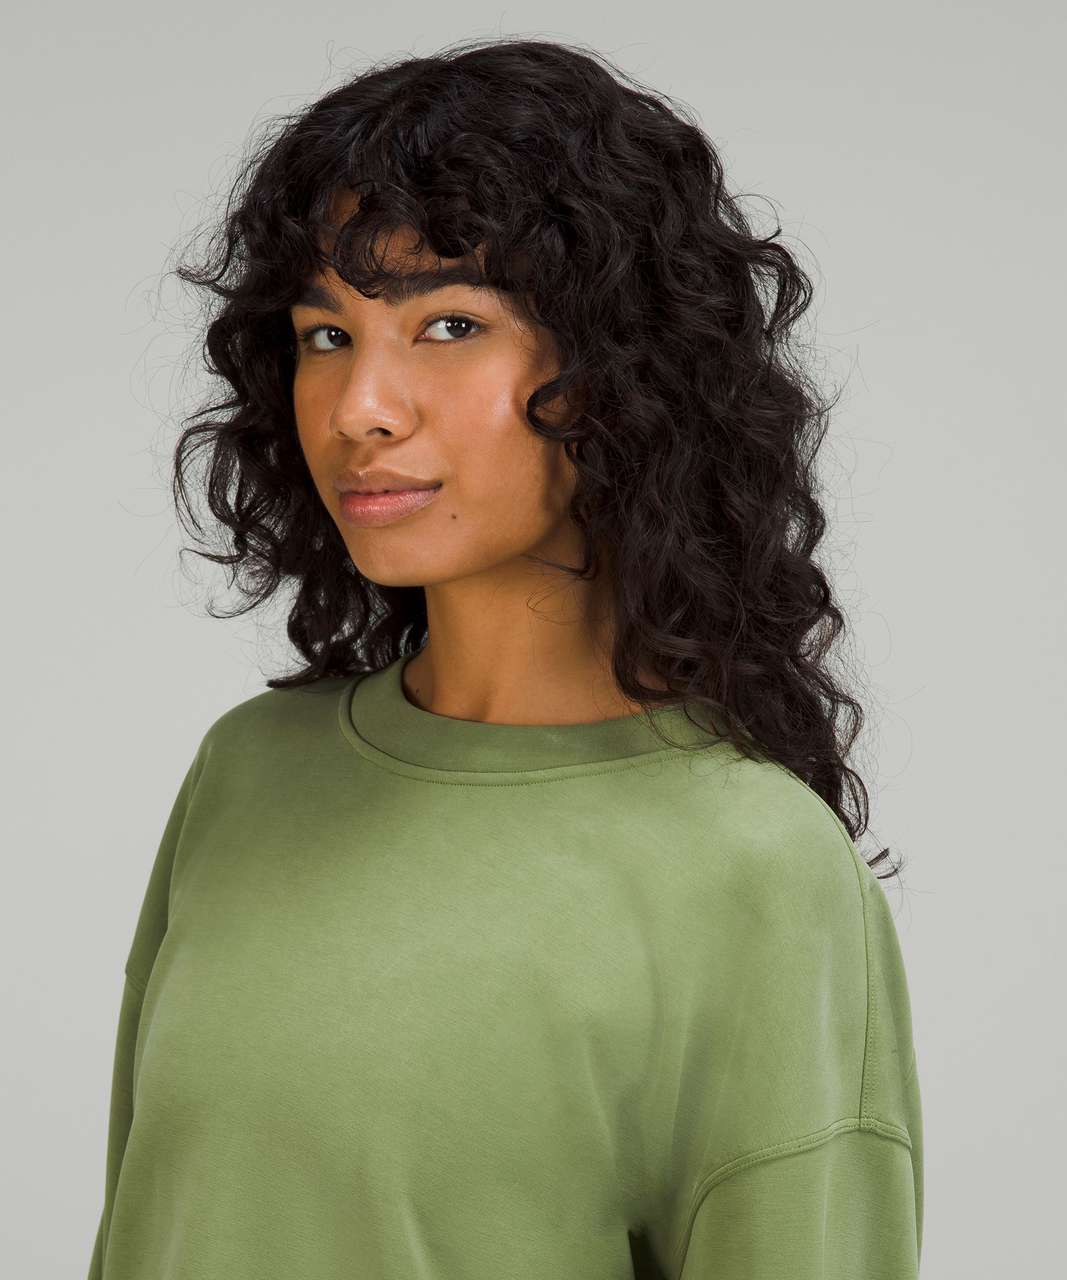 SELL] [US] NWT Lululemon Perfectly Oversized Crop Crew Softstreme in Green  Twill size 2 - $118 shipped : r/lululemonBST